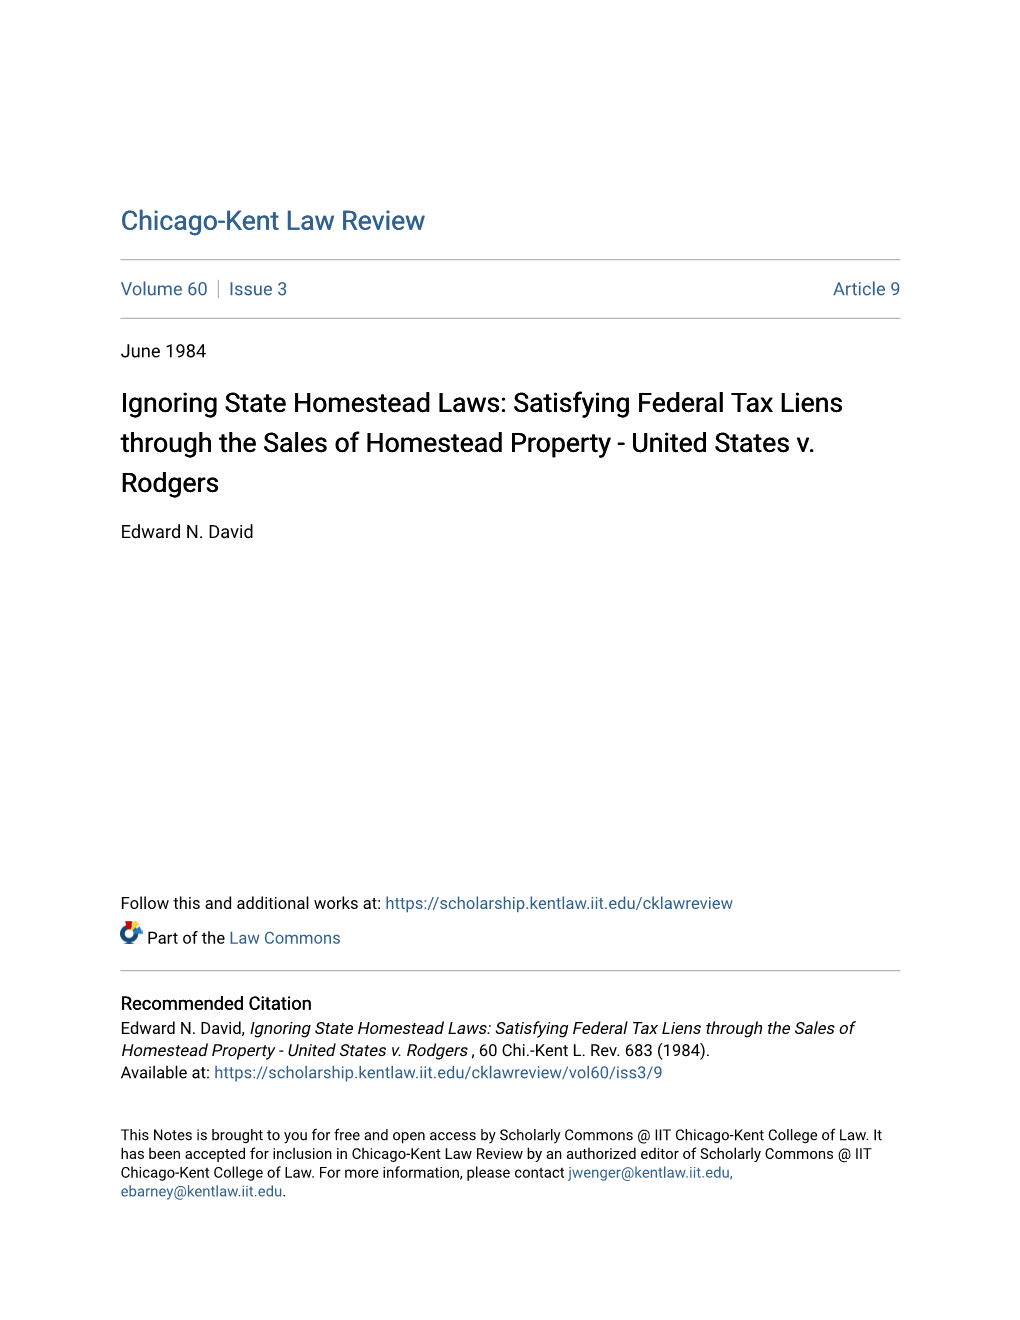 Ignoring State Homestead Laws: Satisfying Federal Tax Liens Through the Sales of Homestead Property - United States V